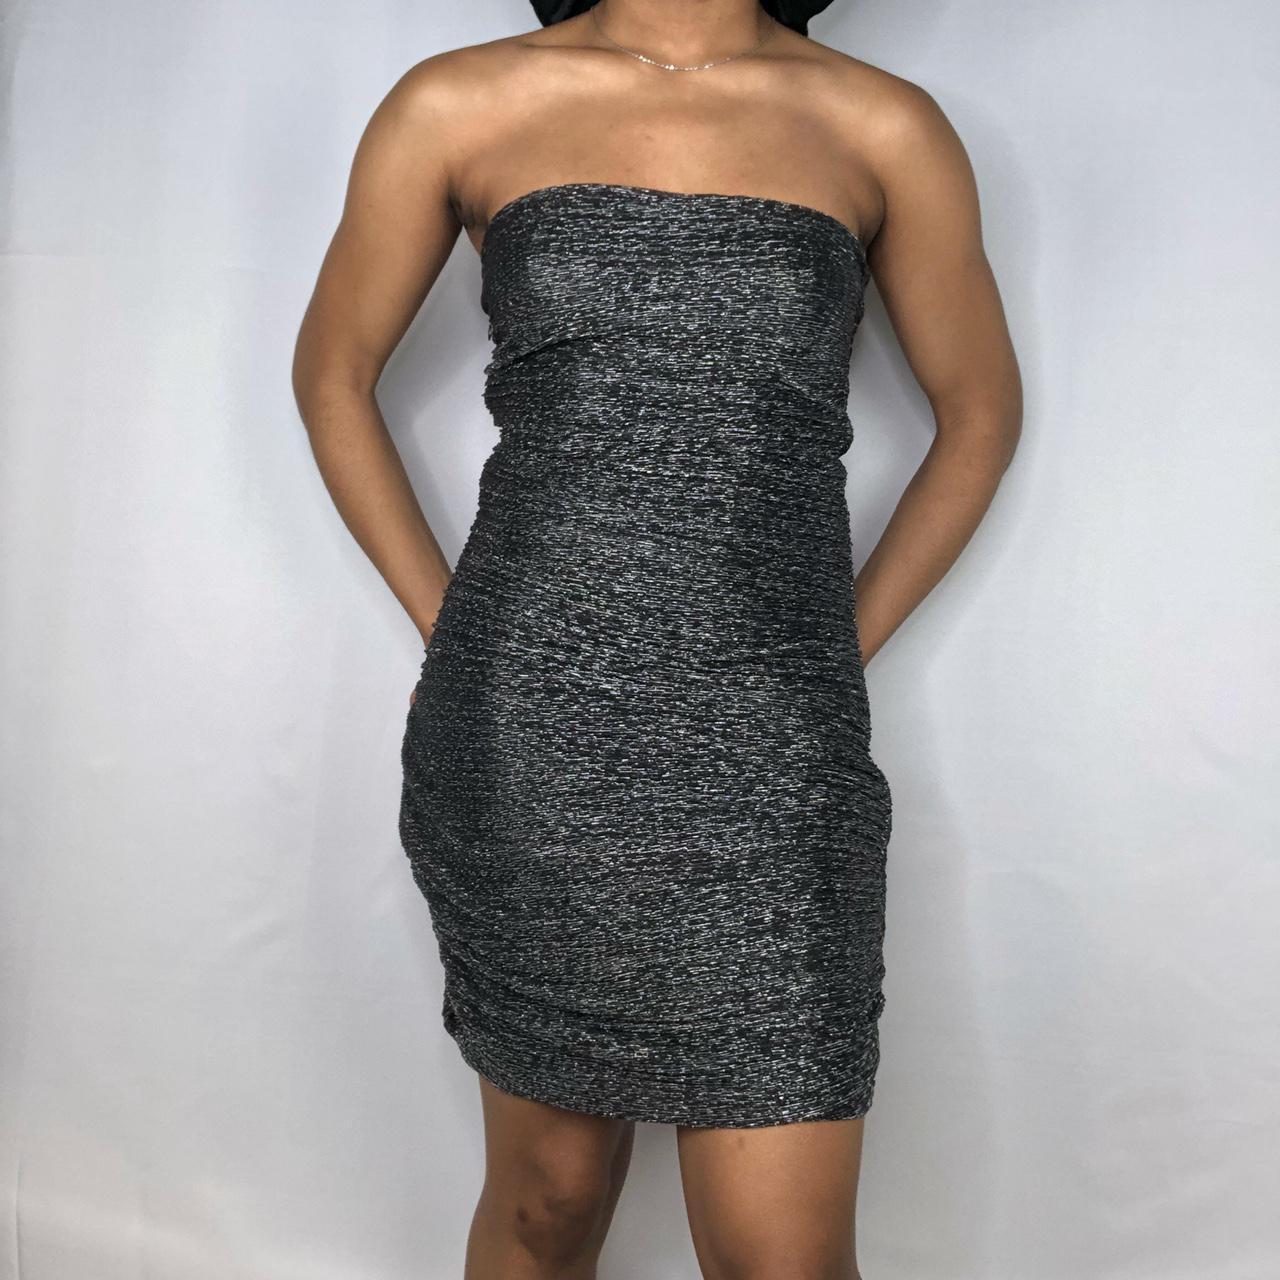 Product Image 1 - Late 2000s strapless party dress

Shimmery